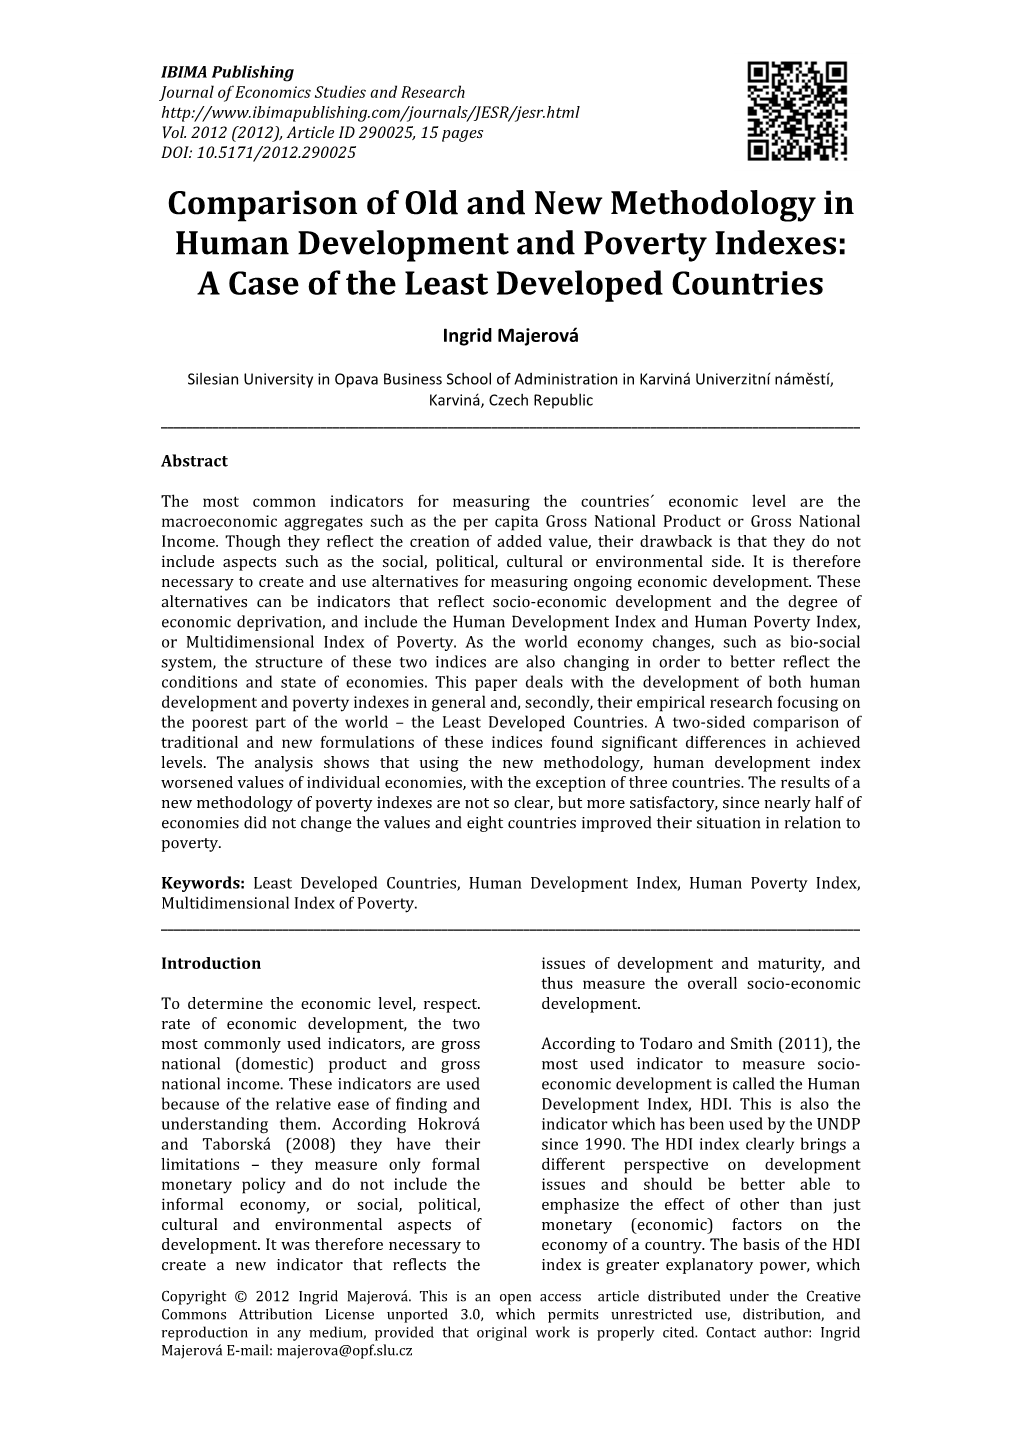 Comparison of Old and New Methodology in Human Development and Poverty Indexes: a Case of the Least Developed Countries